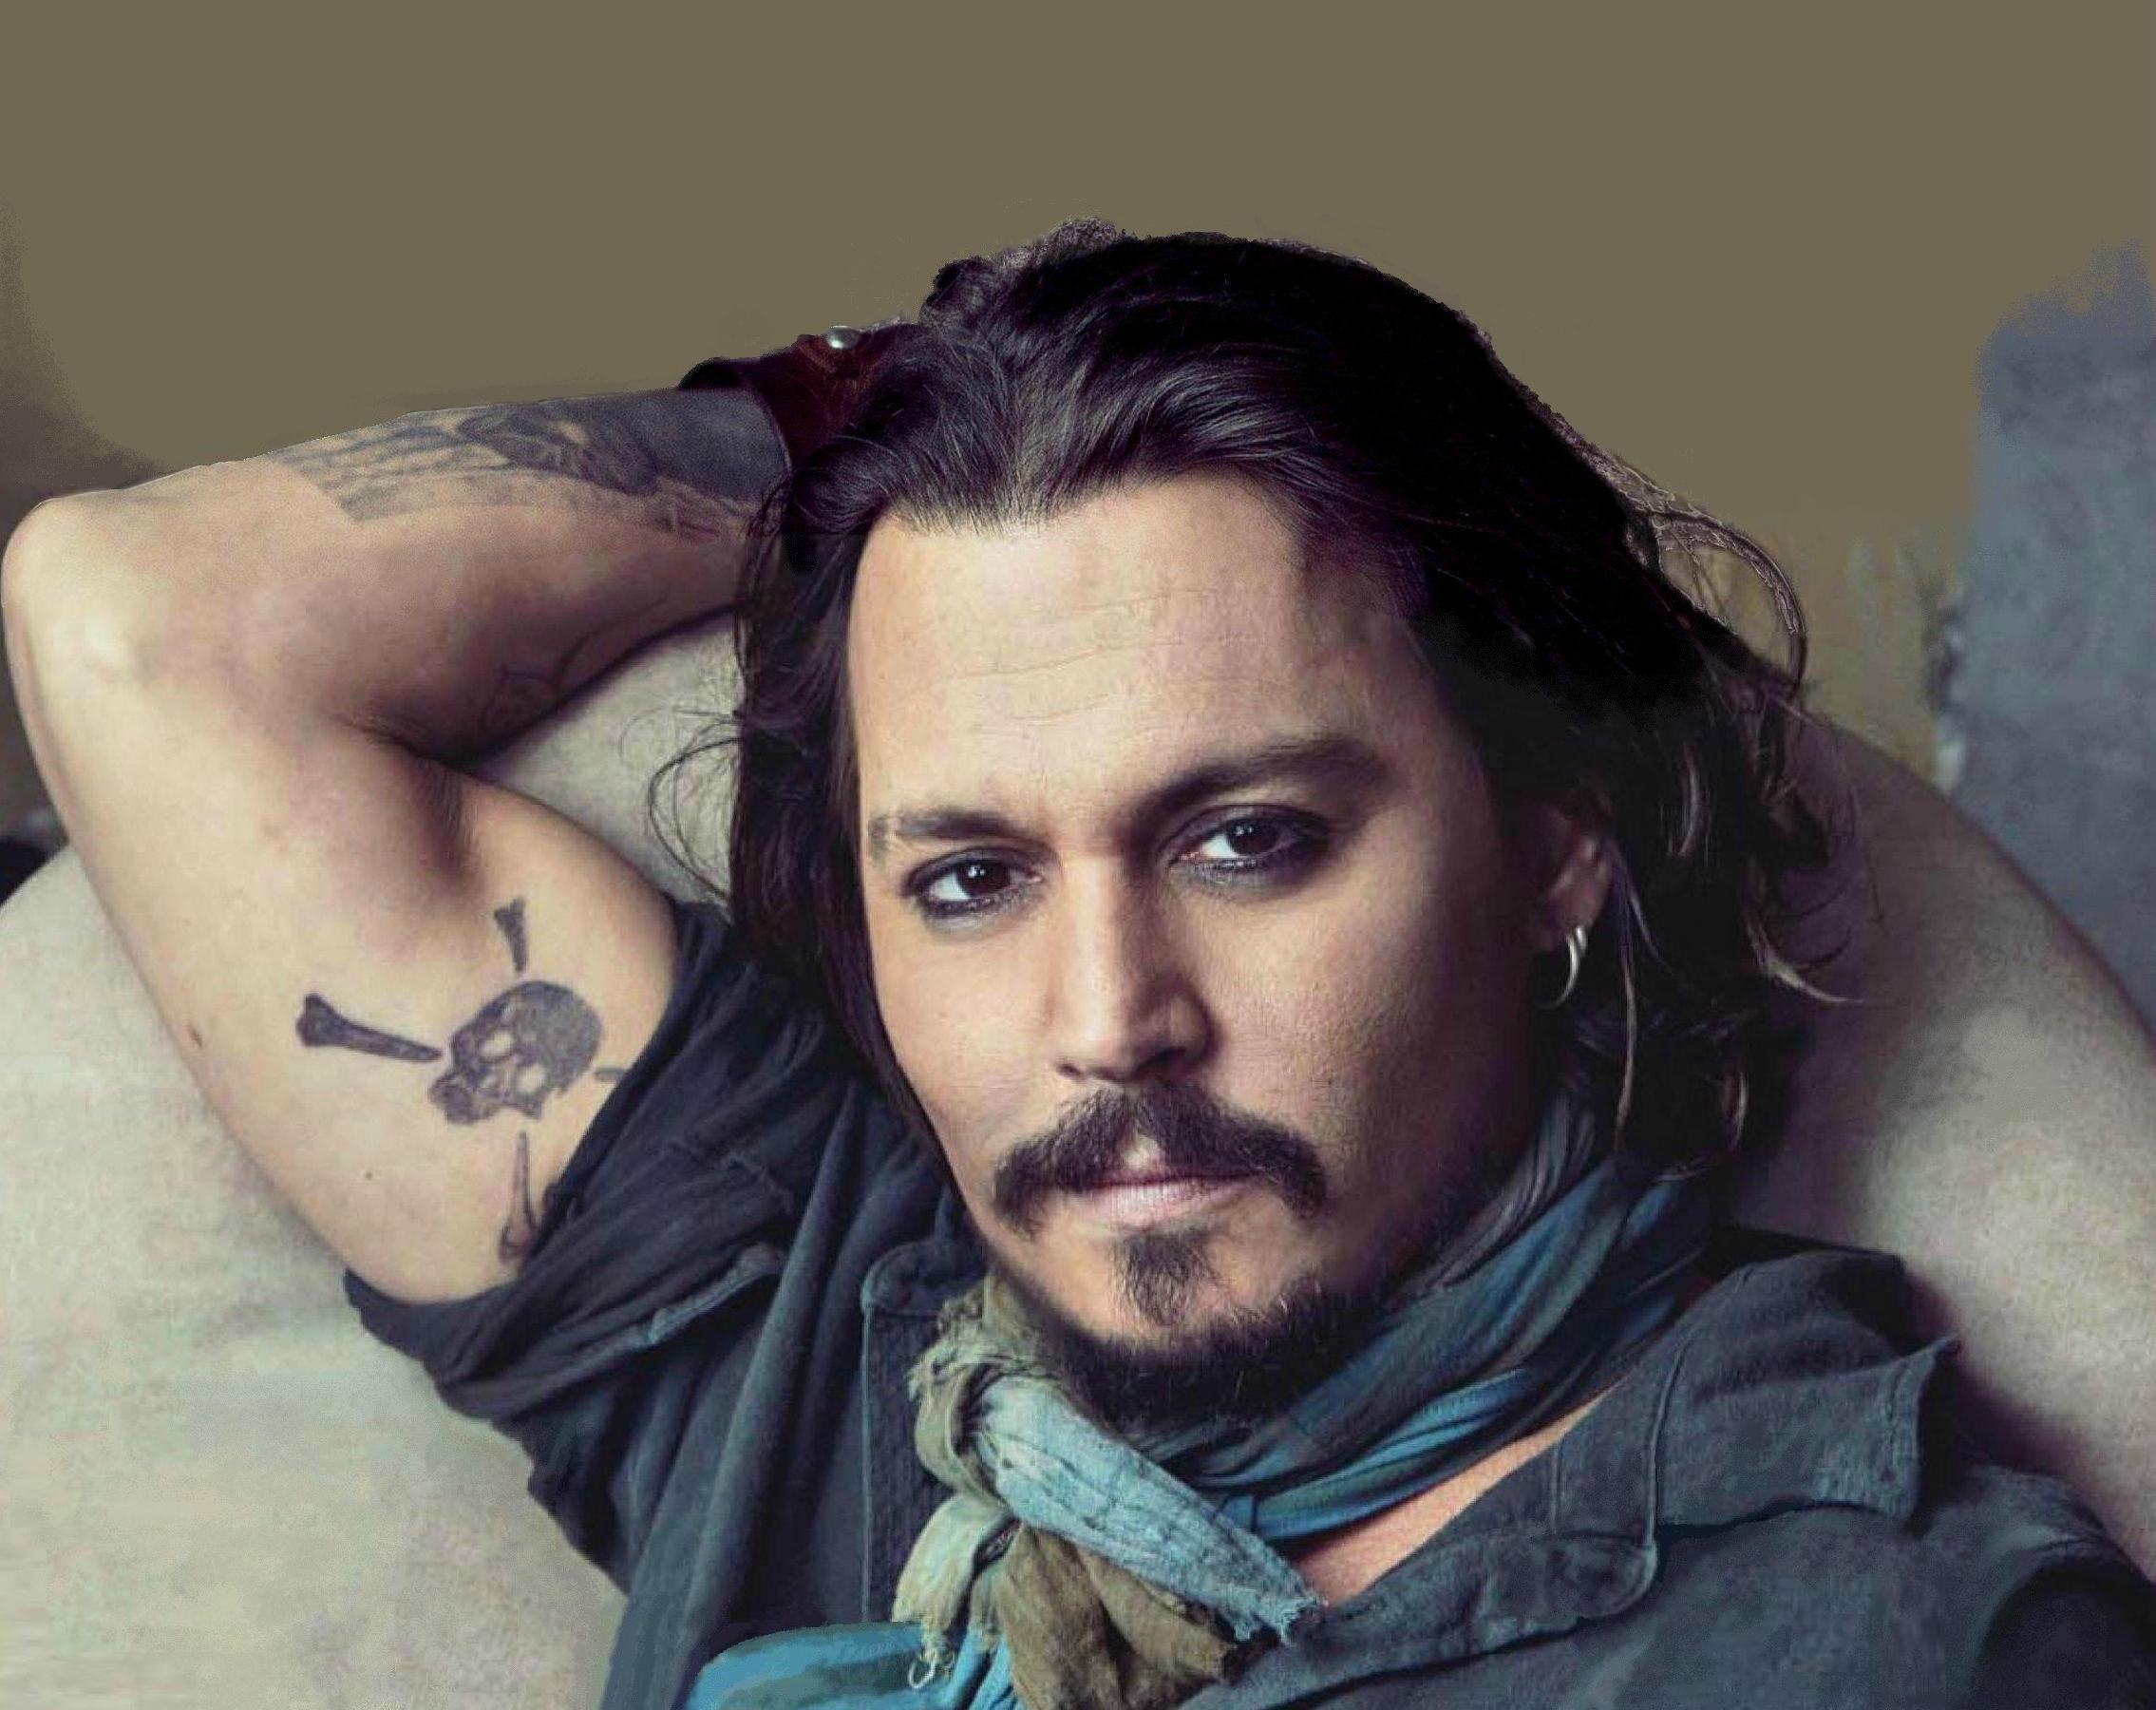 Overview of the roles of Johnny Depp